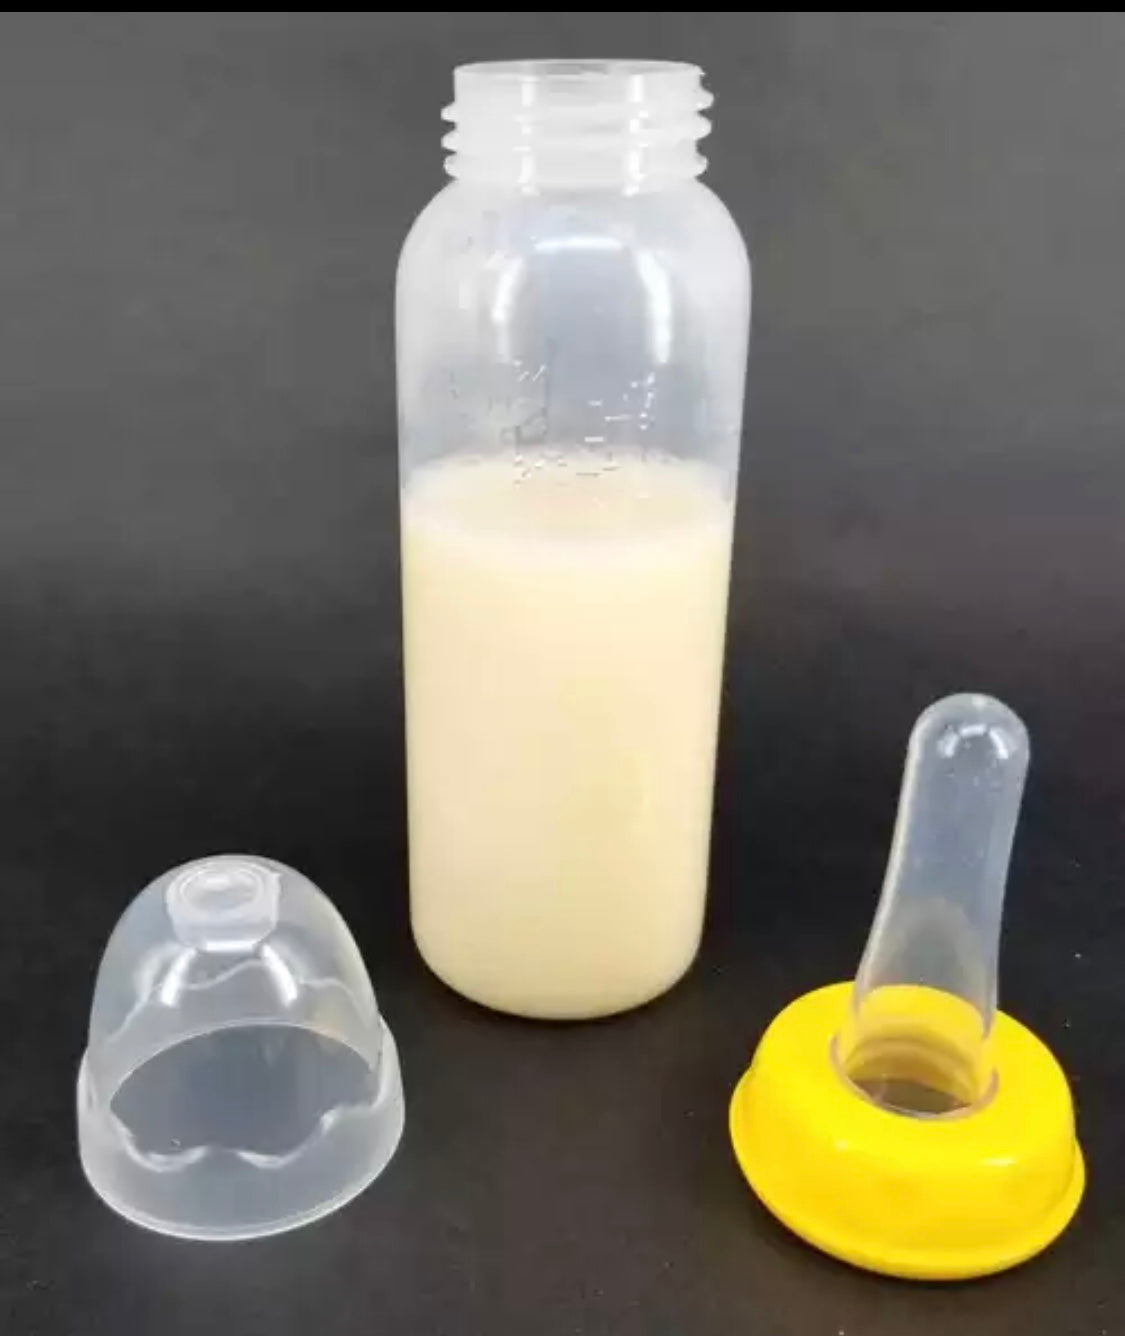 DDLGVERSE adult sized baby bottle with nipple with yellow cap